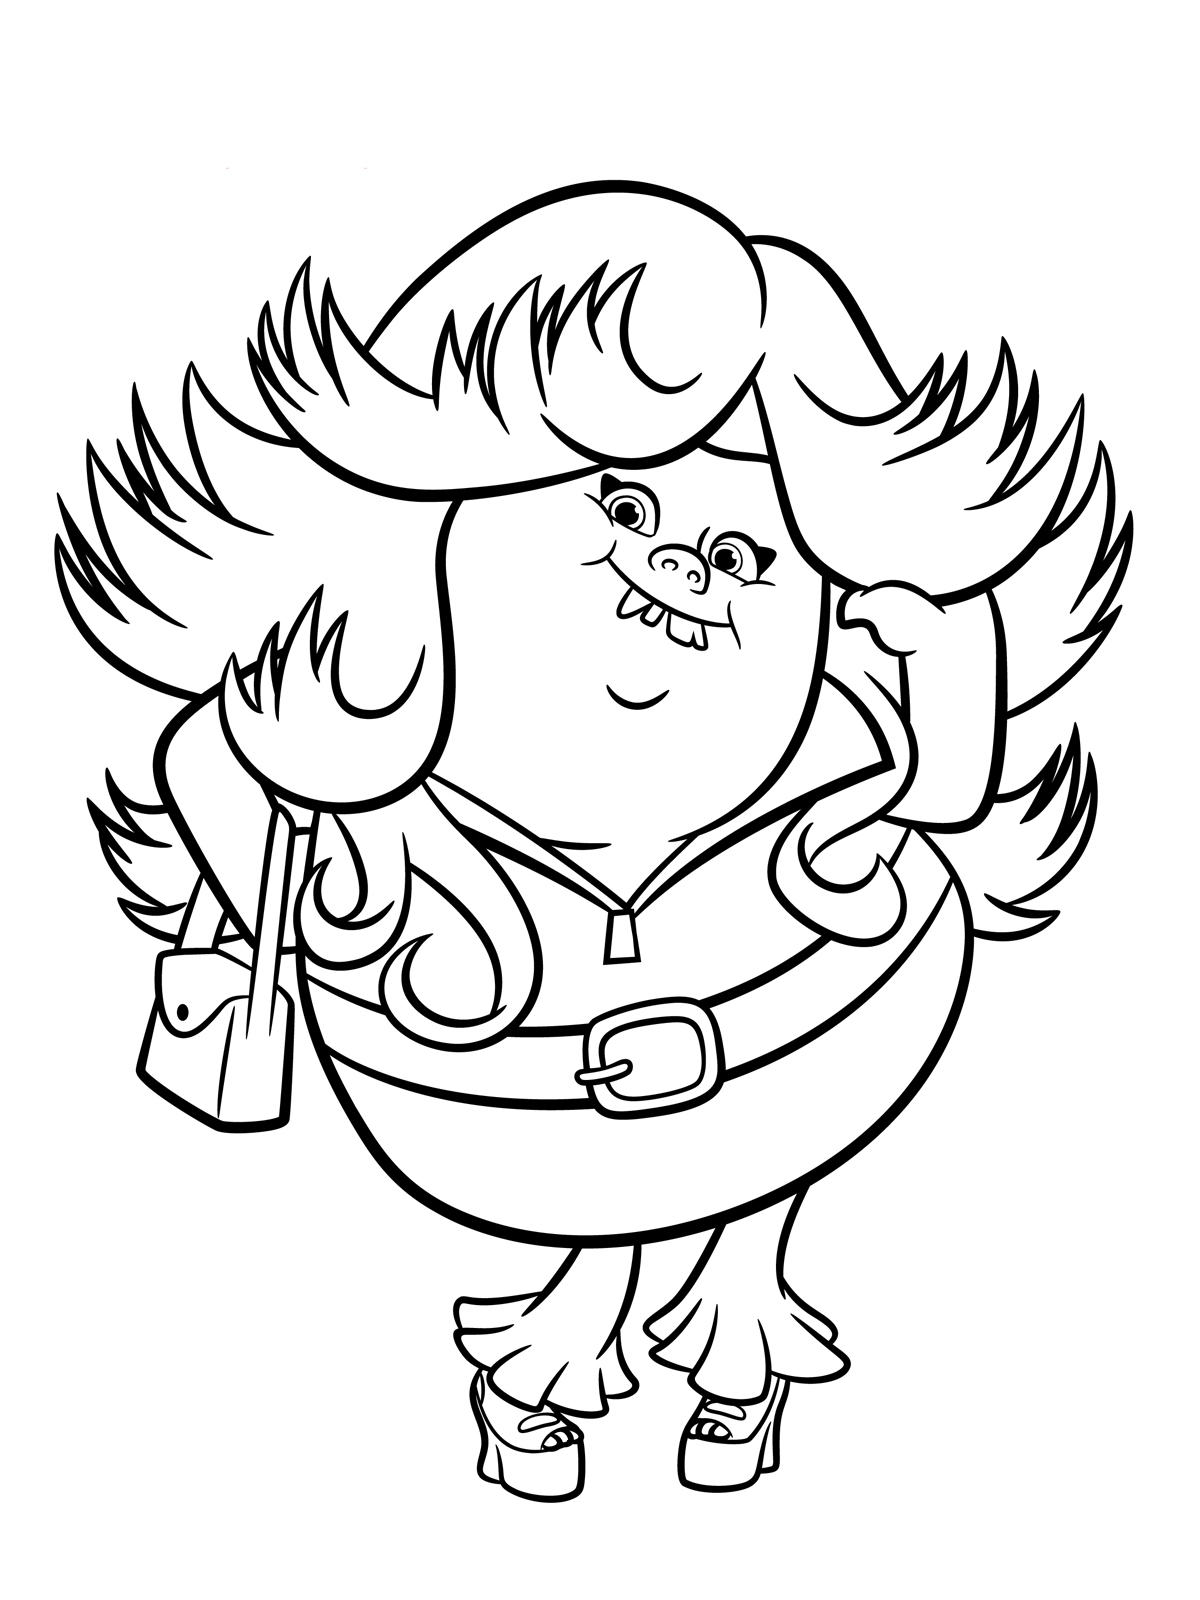 Trolls Movie Free Coloring Pages at GetDrawings | Free ...